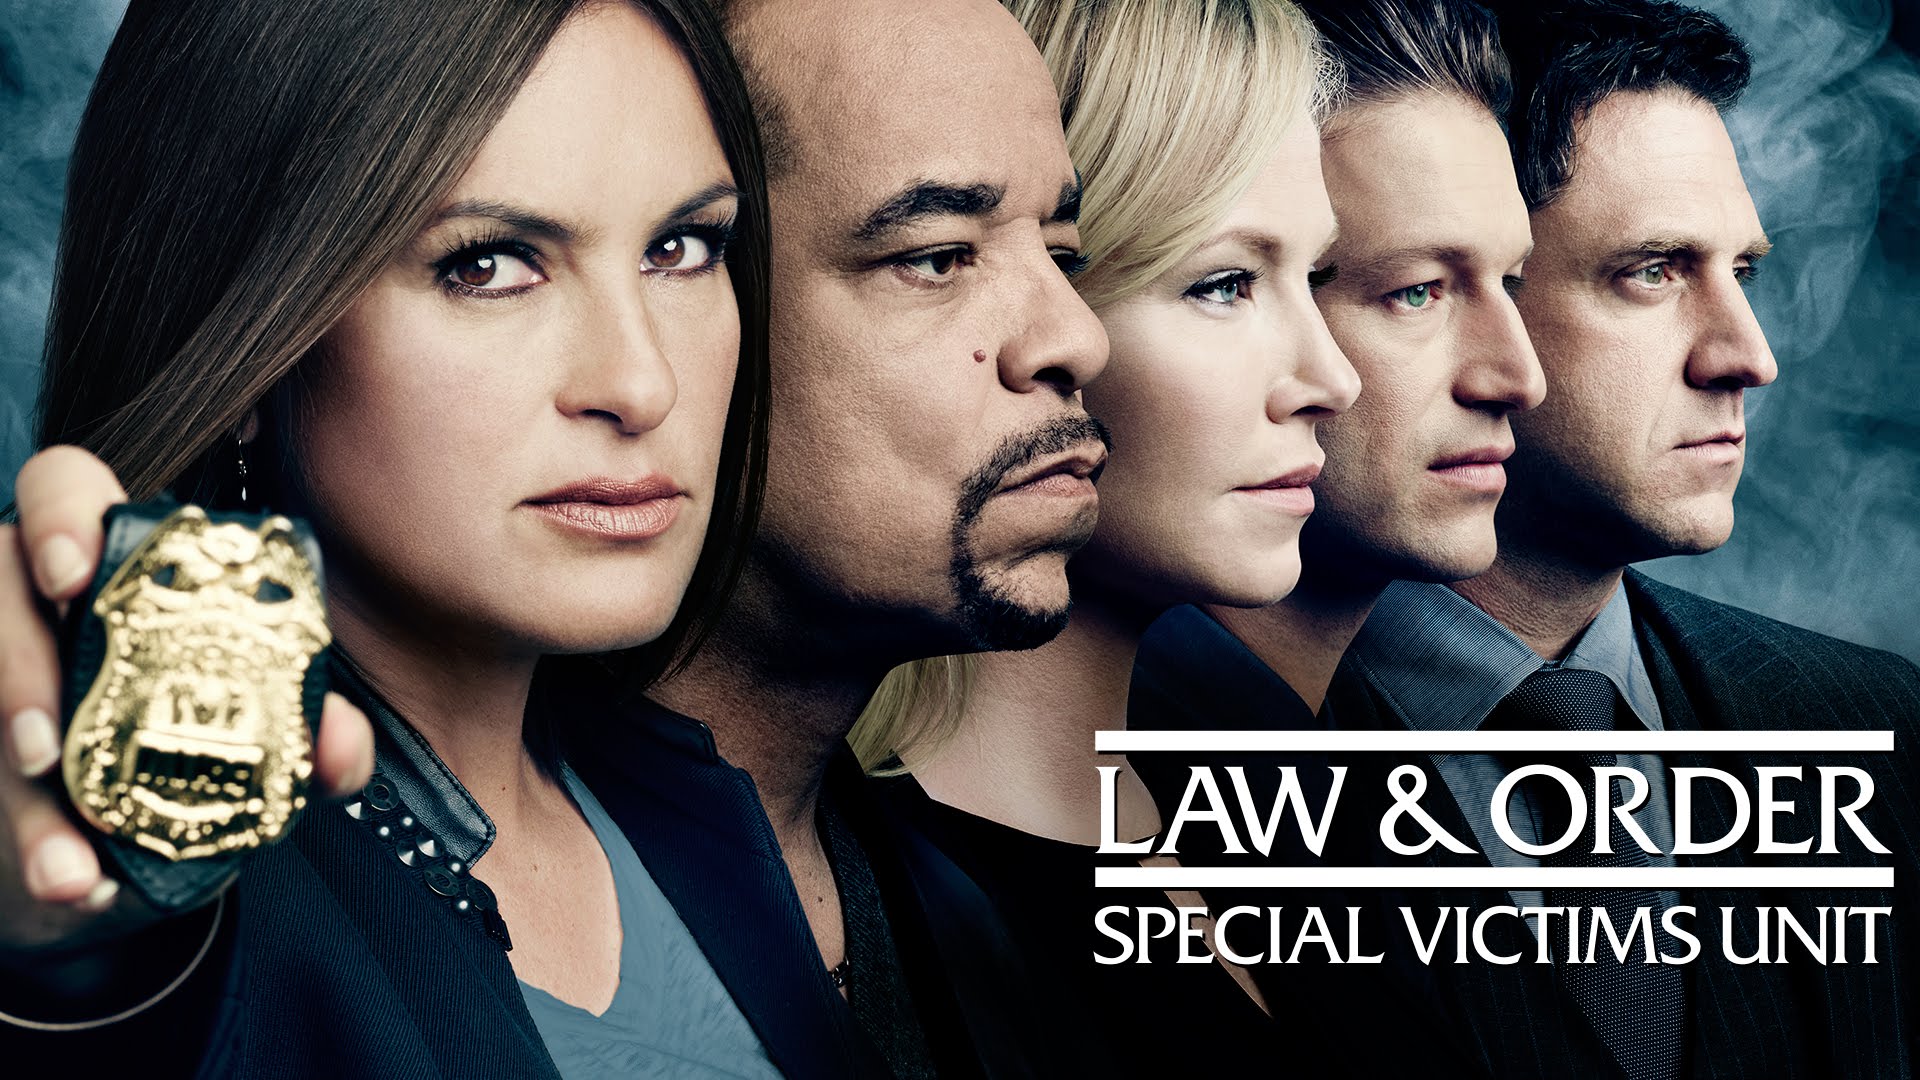 watch-law-order-special-victims-unit-svu-streaming-peacock